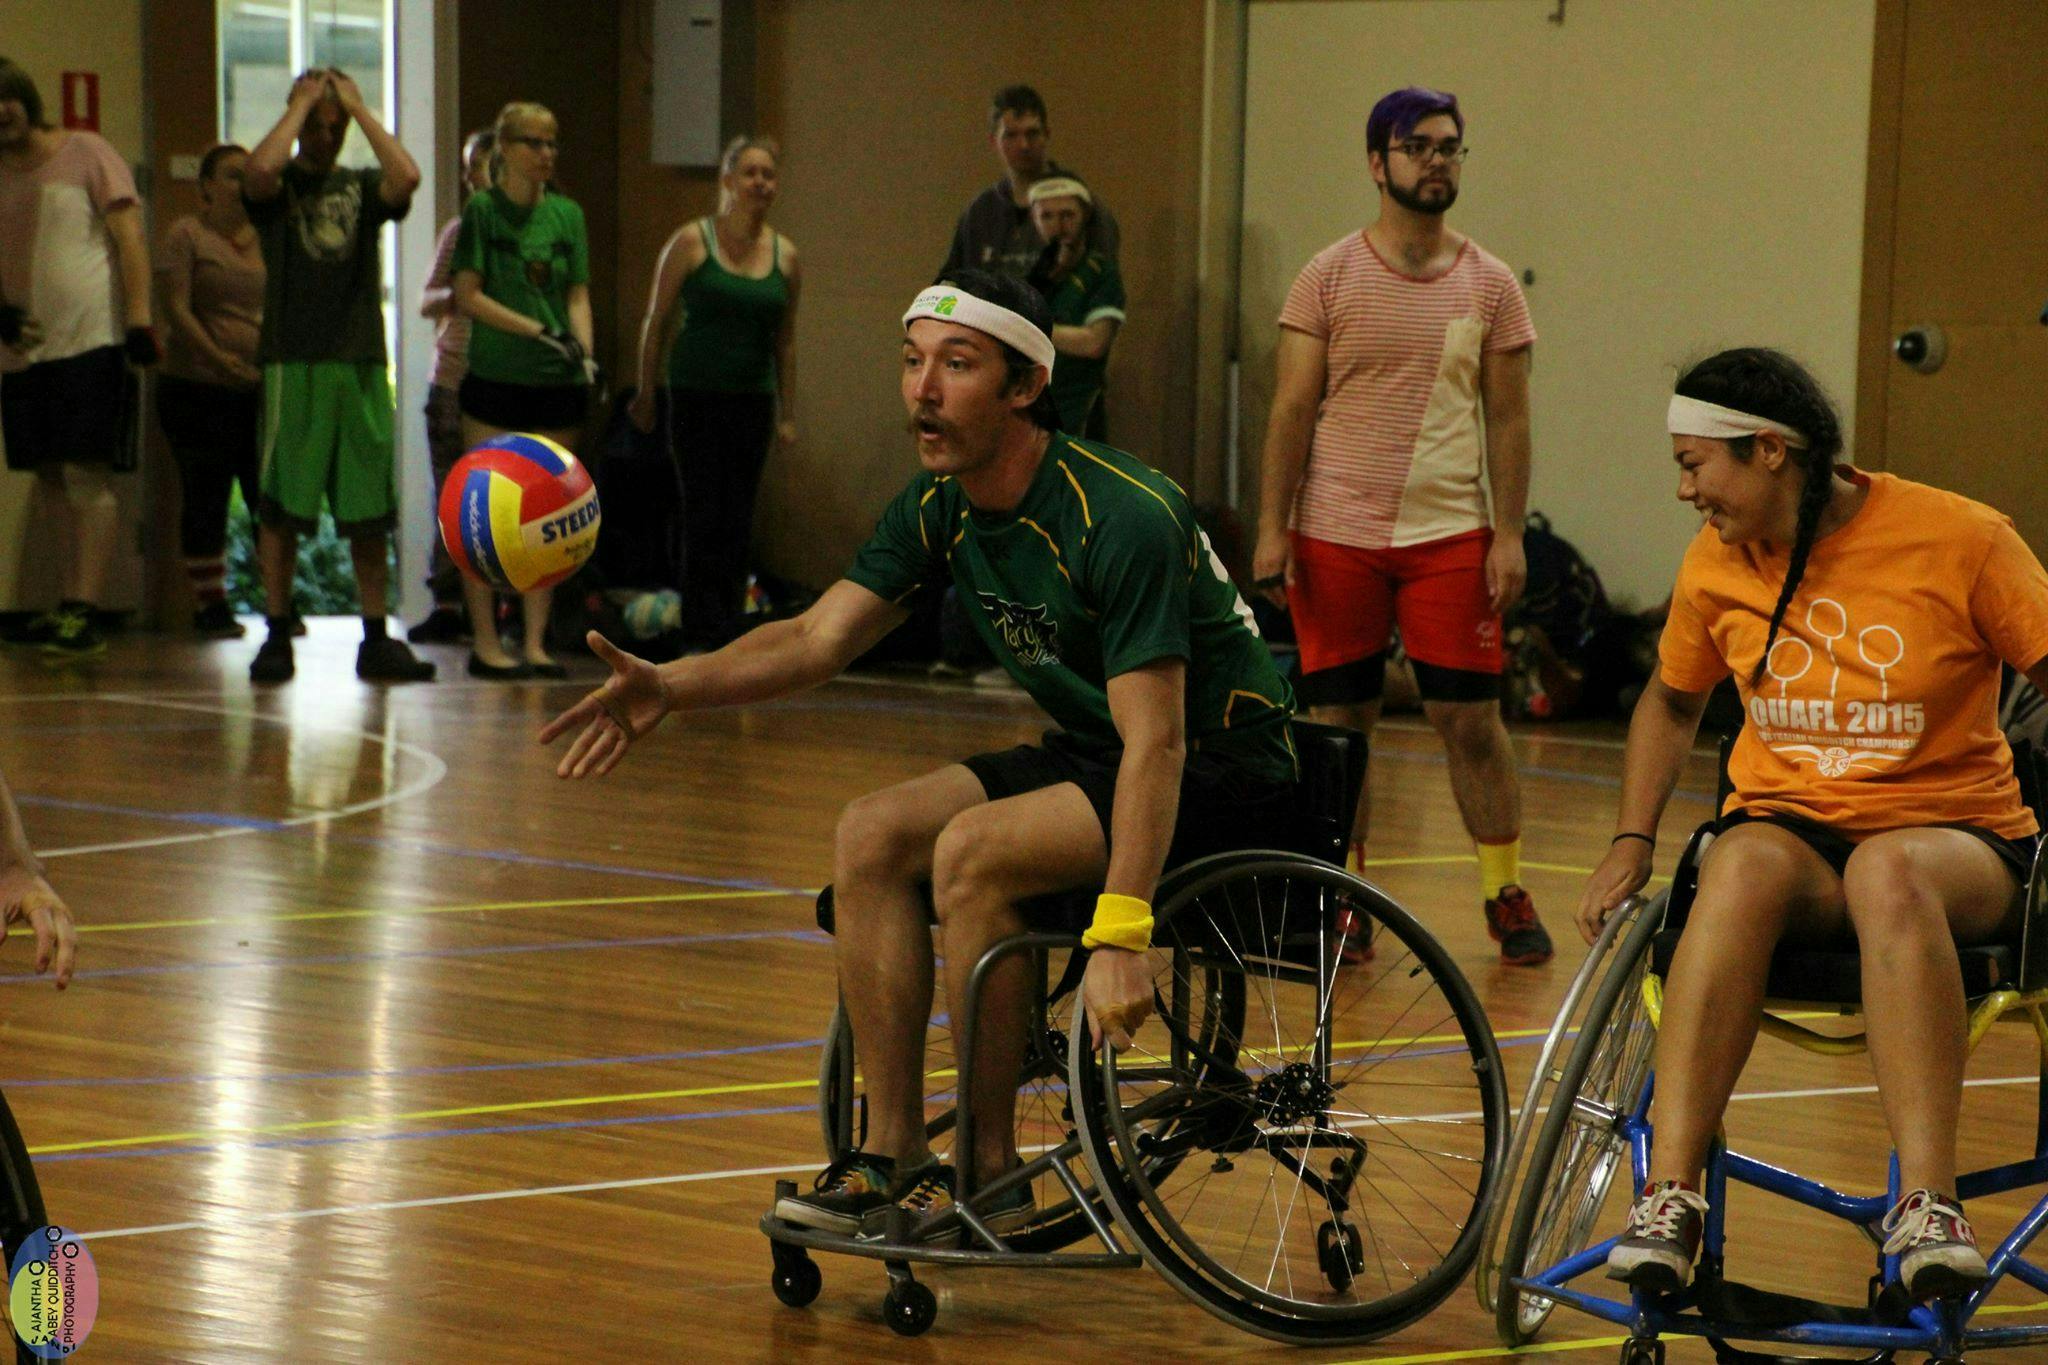 Player throws the ball while playing Wheelchair Quadball